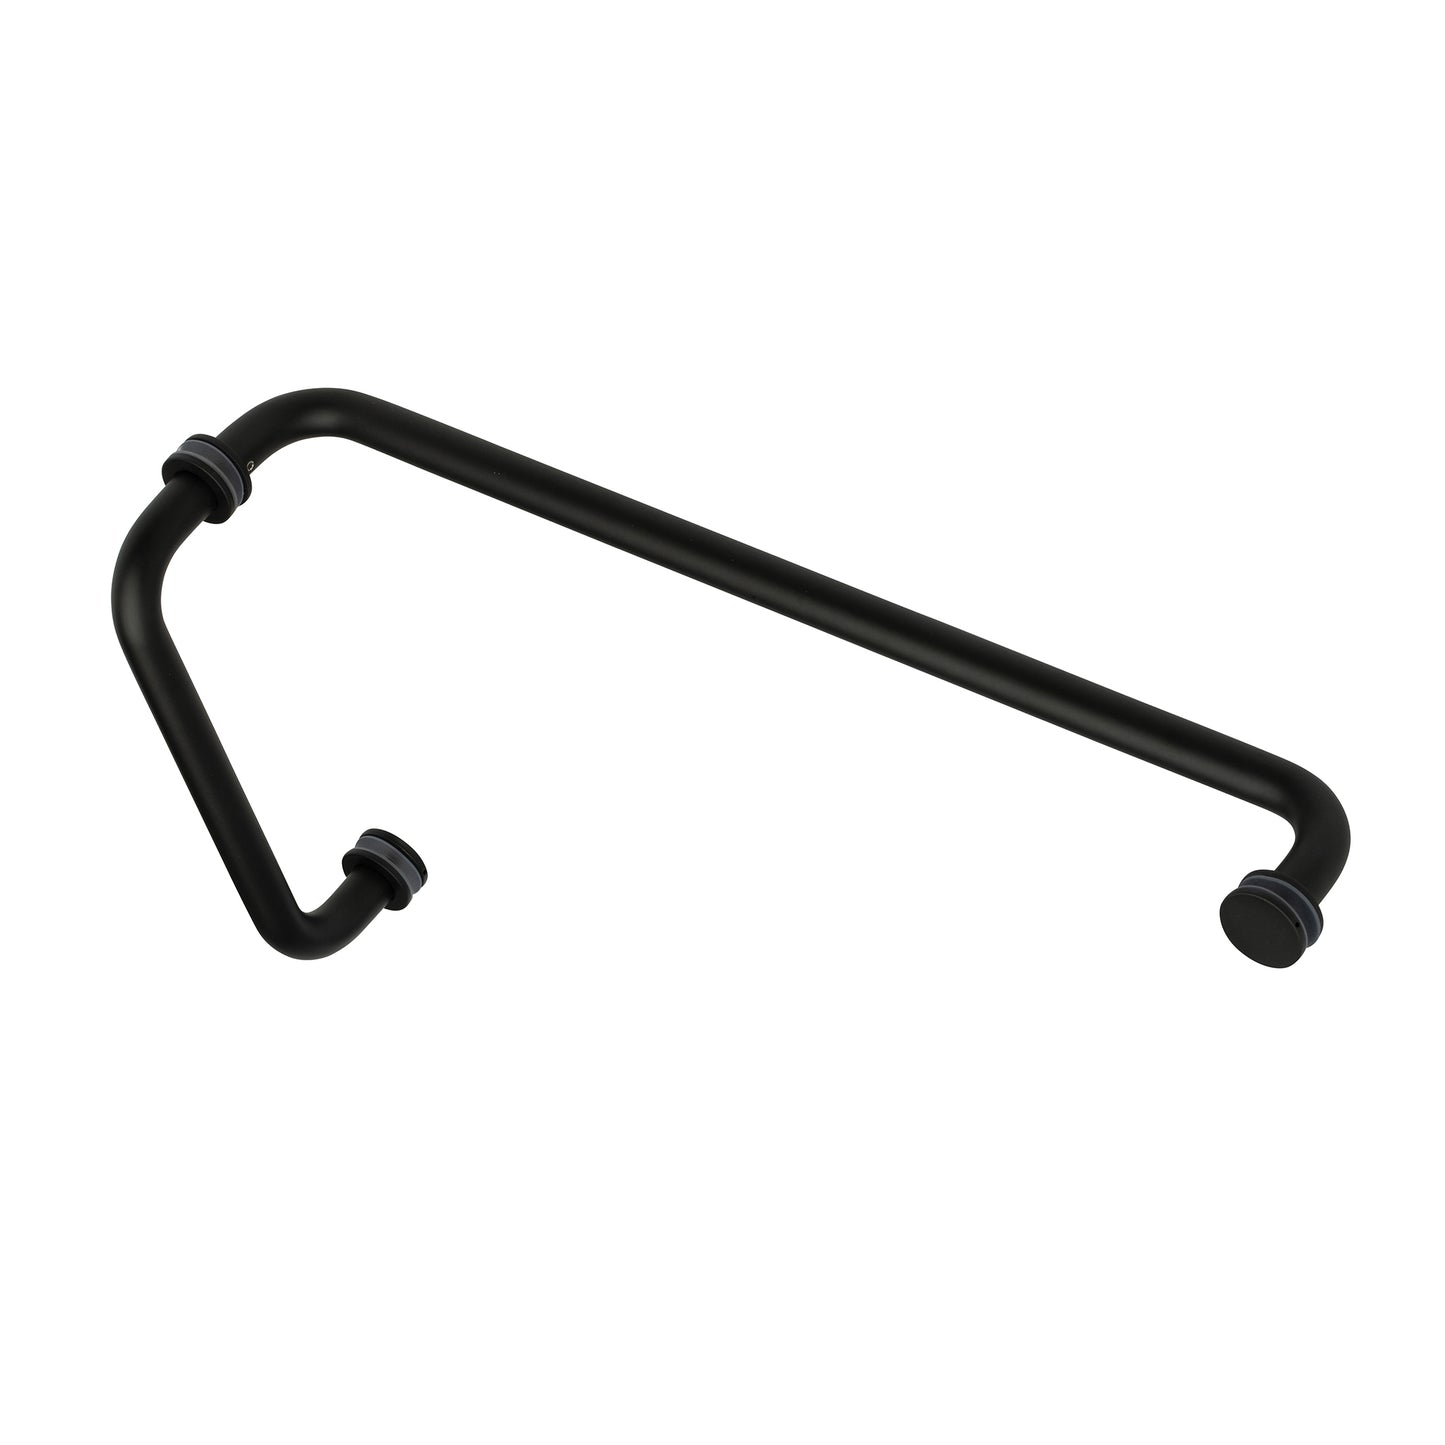 8" Pull/18" Towel Bar with Metal Washers